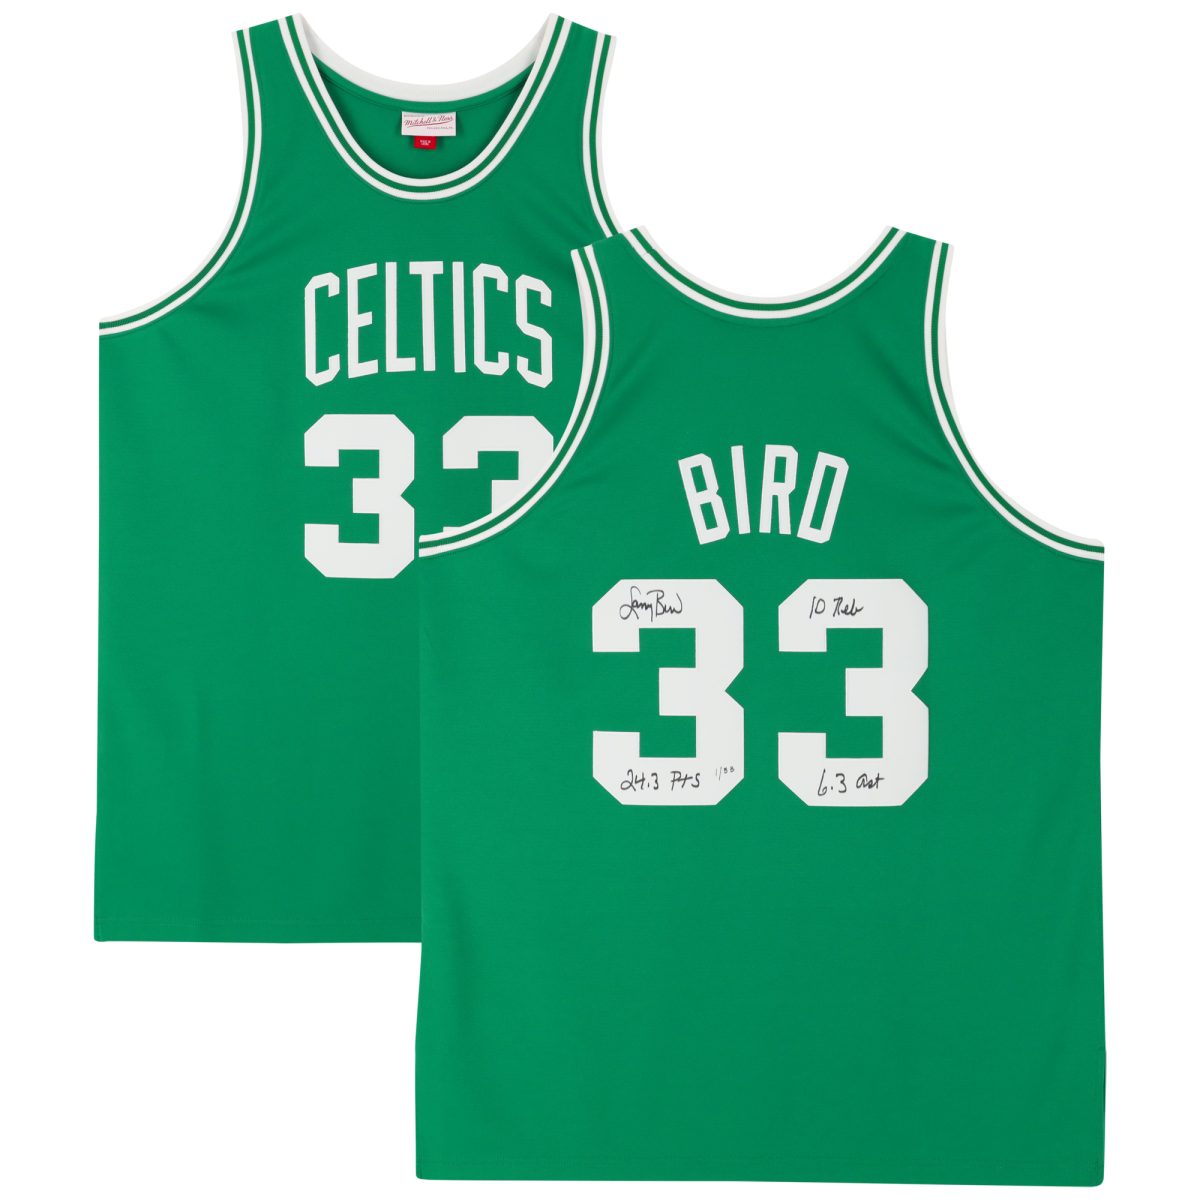 Larry Bird Boston Celtics Autographed Green Mitchell & Ness 1985-1986 Authentic Jersey with Multiple Inscriptions - Limited Edition #1/33